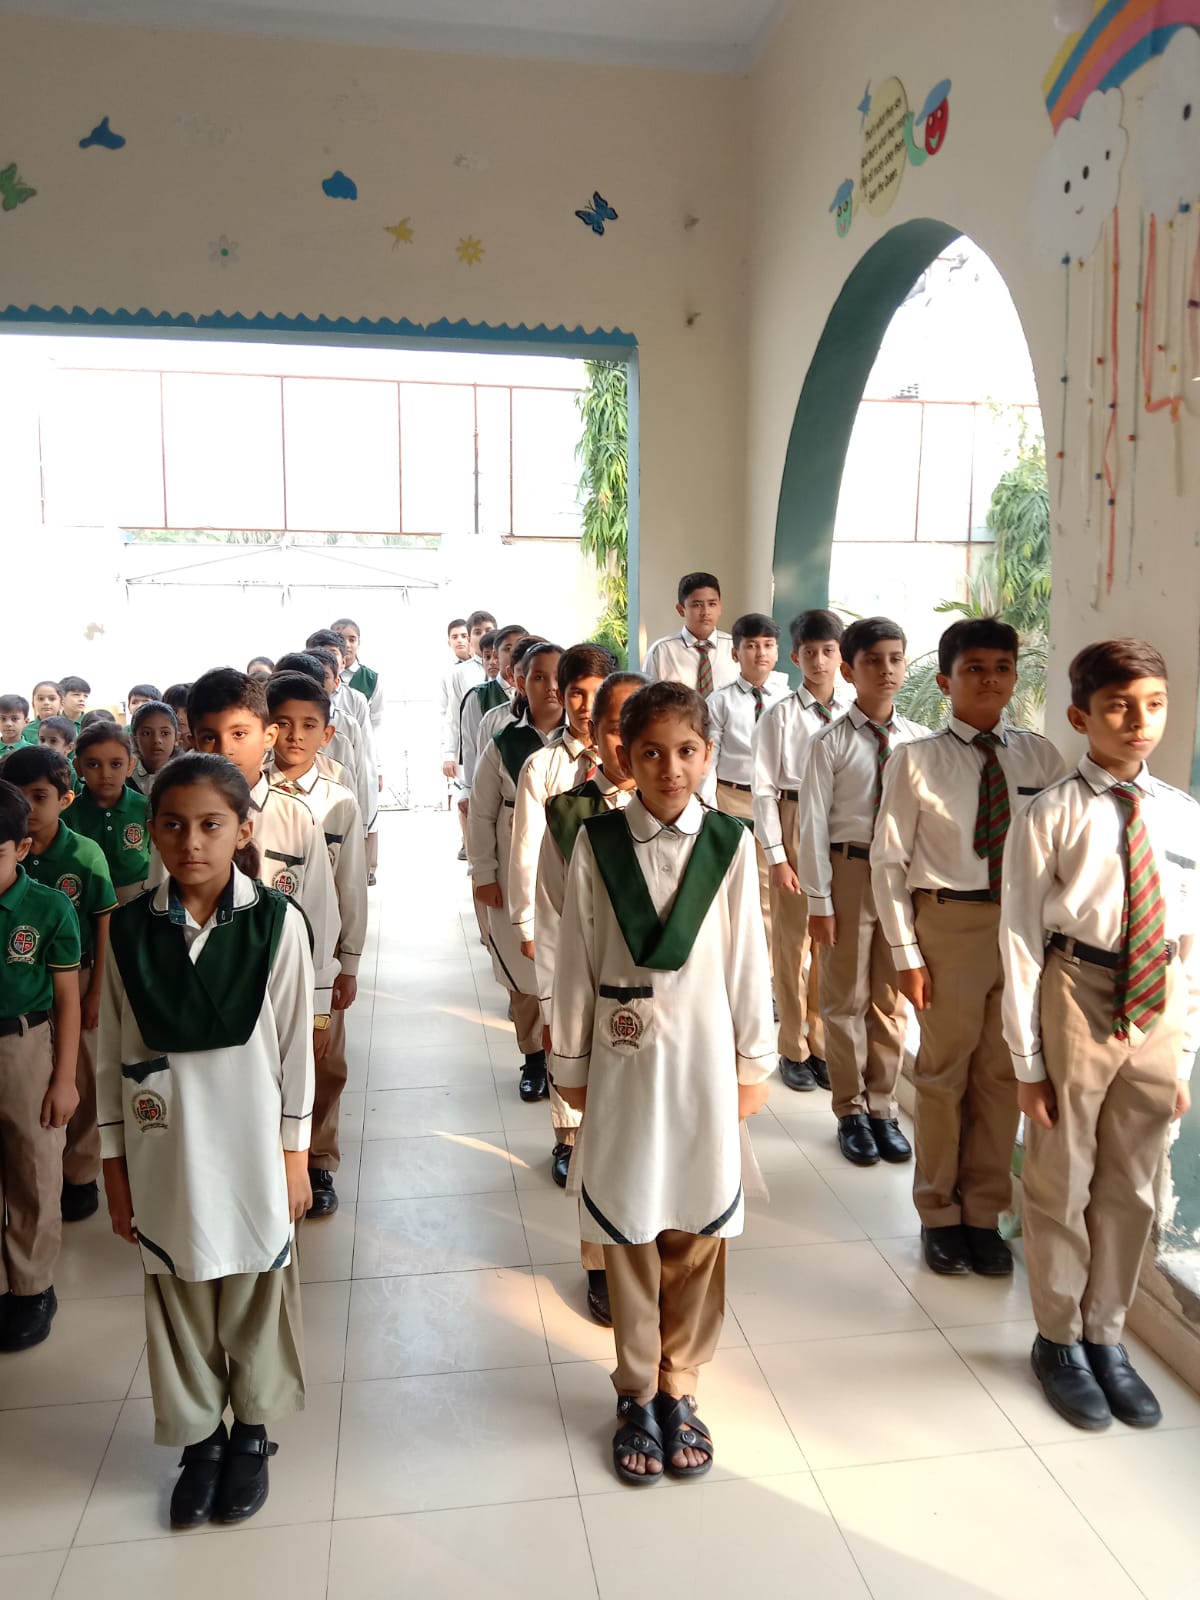 Alhamdulillah – Some random pictures from morning assemblies at Forces School Al Sultan Campus